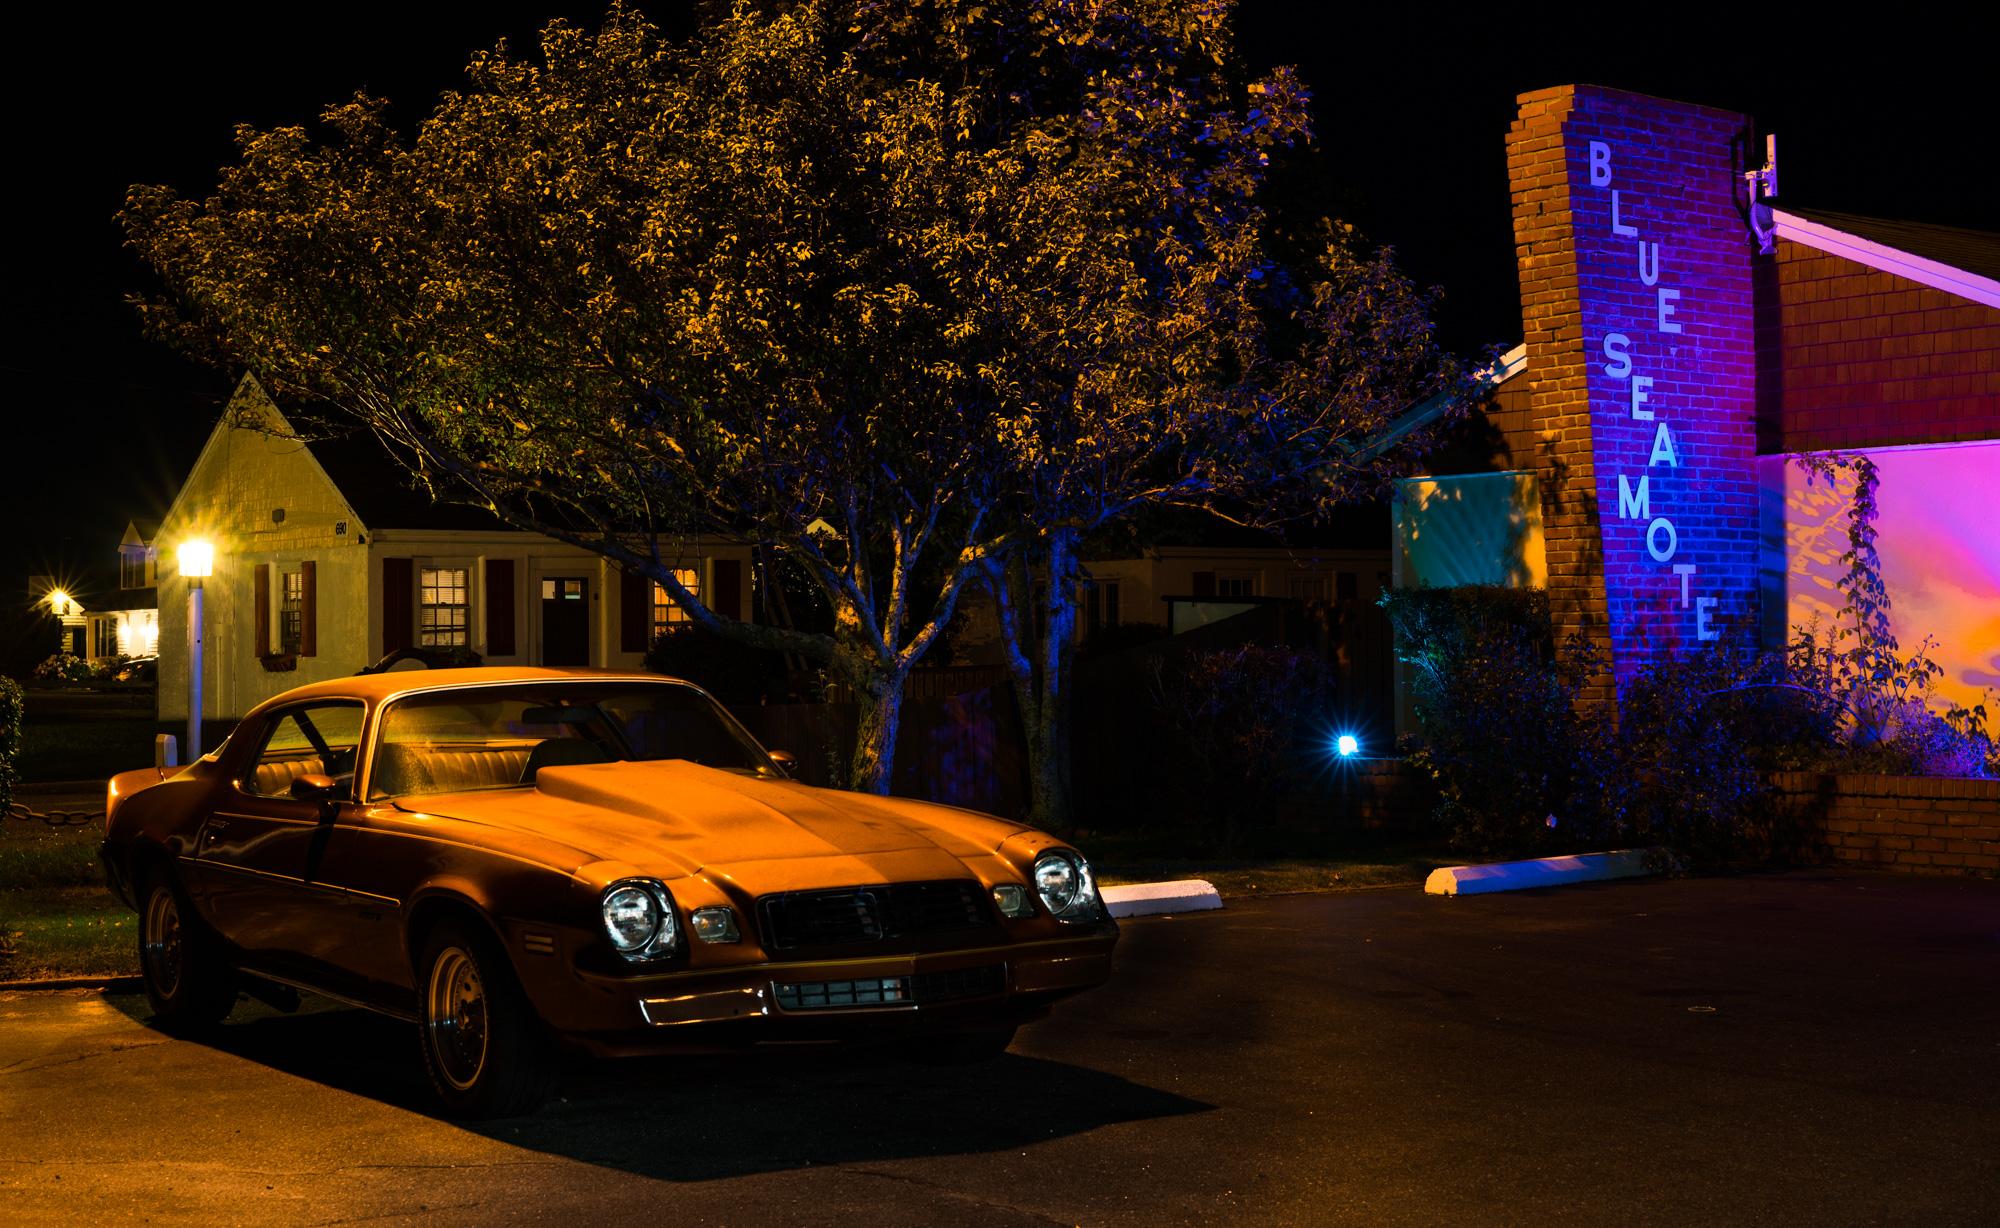 Howard Lewis Landscape Photograph -  Limited Edition Color Photograph - Car, Camaro, Hotel, Night